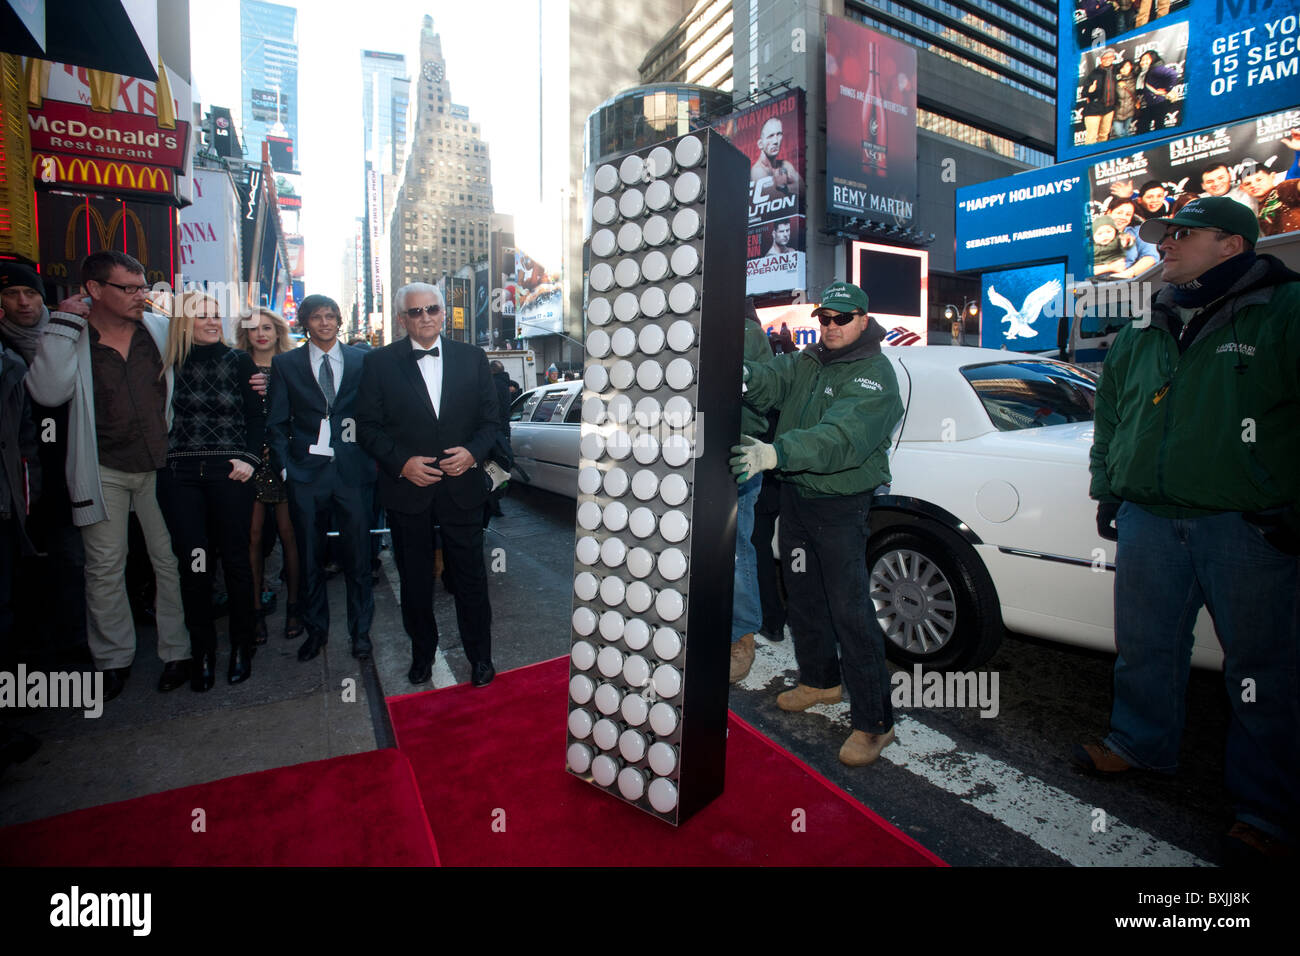 The Seven Foot Tall Numeral 1 Walks The Red Carpet To Complete The 2 0 1 Sign In Nyc S Times Square Stock Photo Alamy